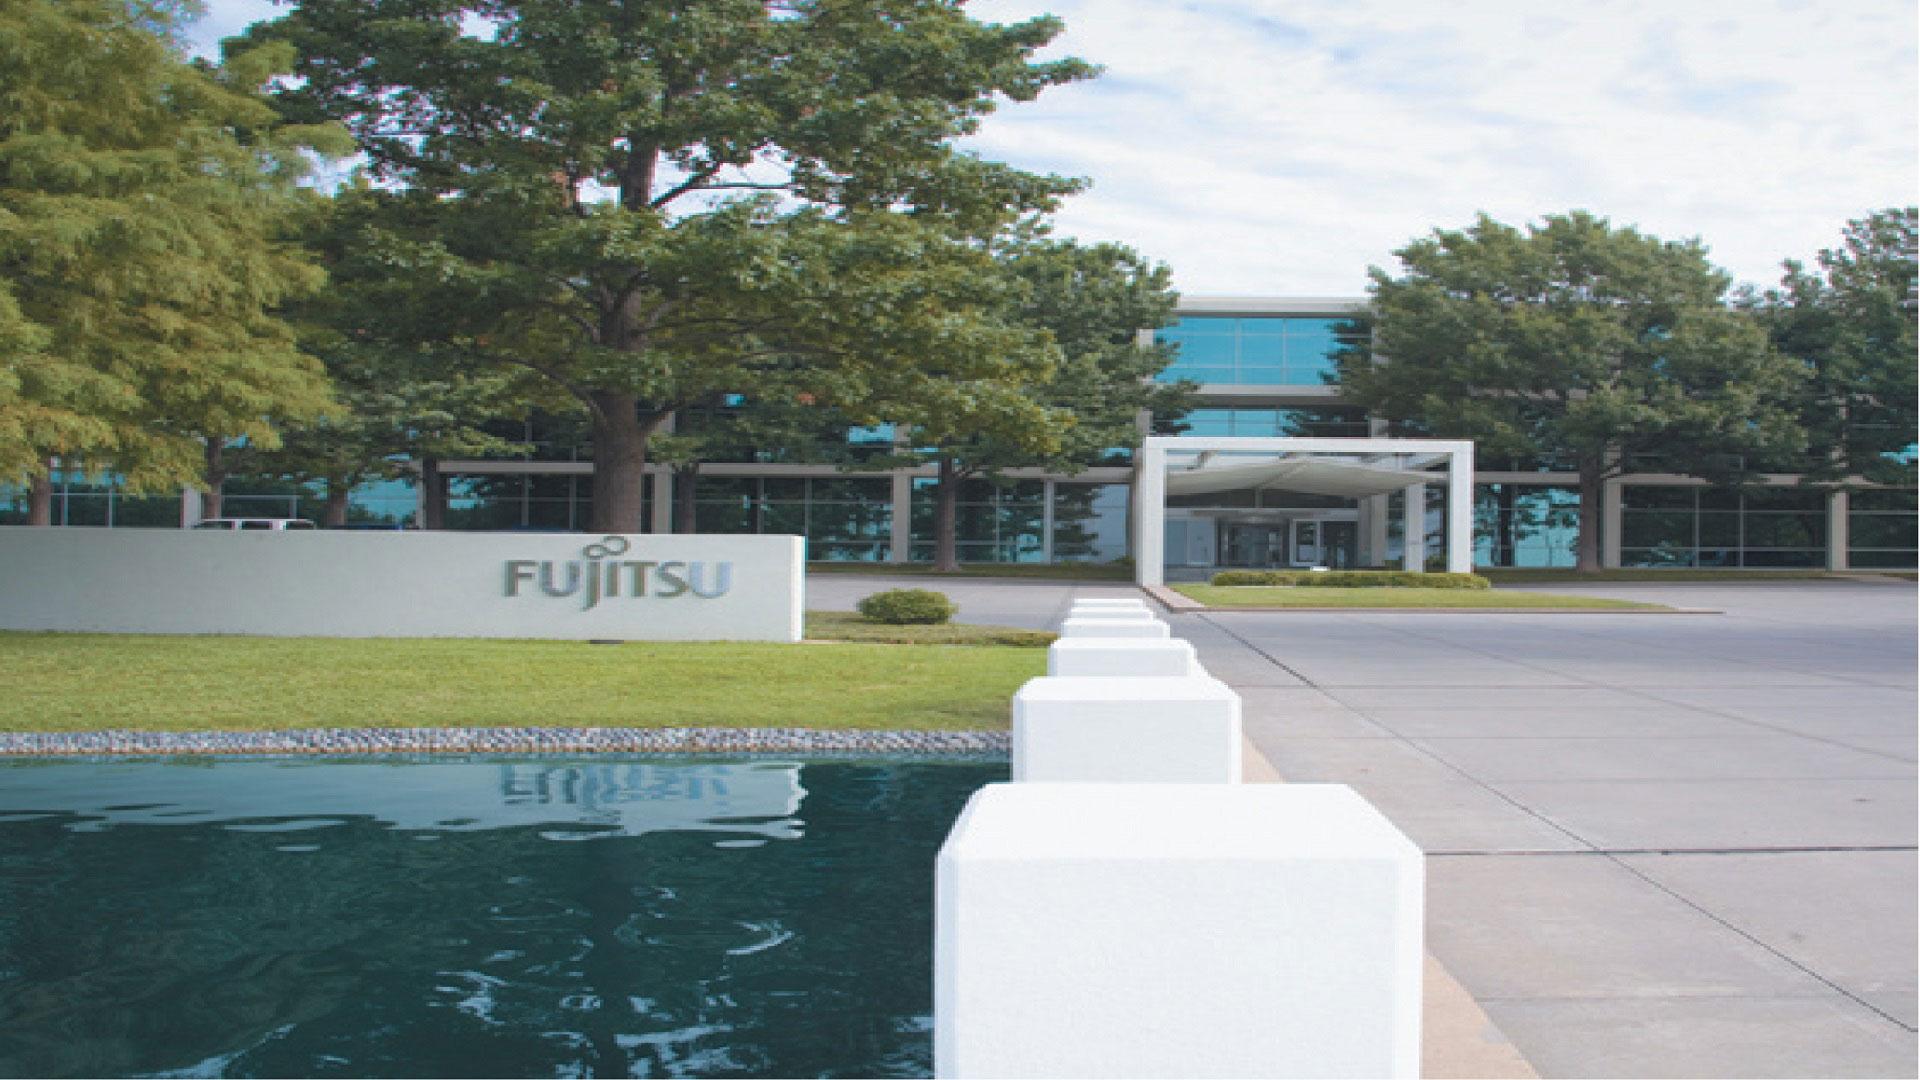  Streamlining Product Development and Testing: Fujitsu's Journey with Dassault Systèmes - IoT ONE Case Study